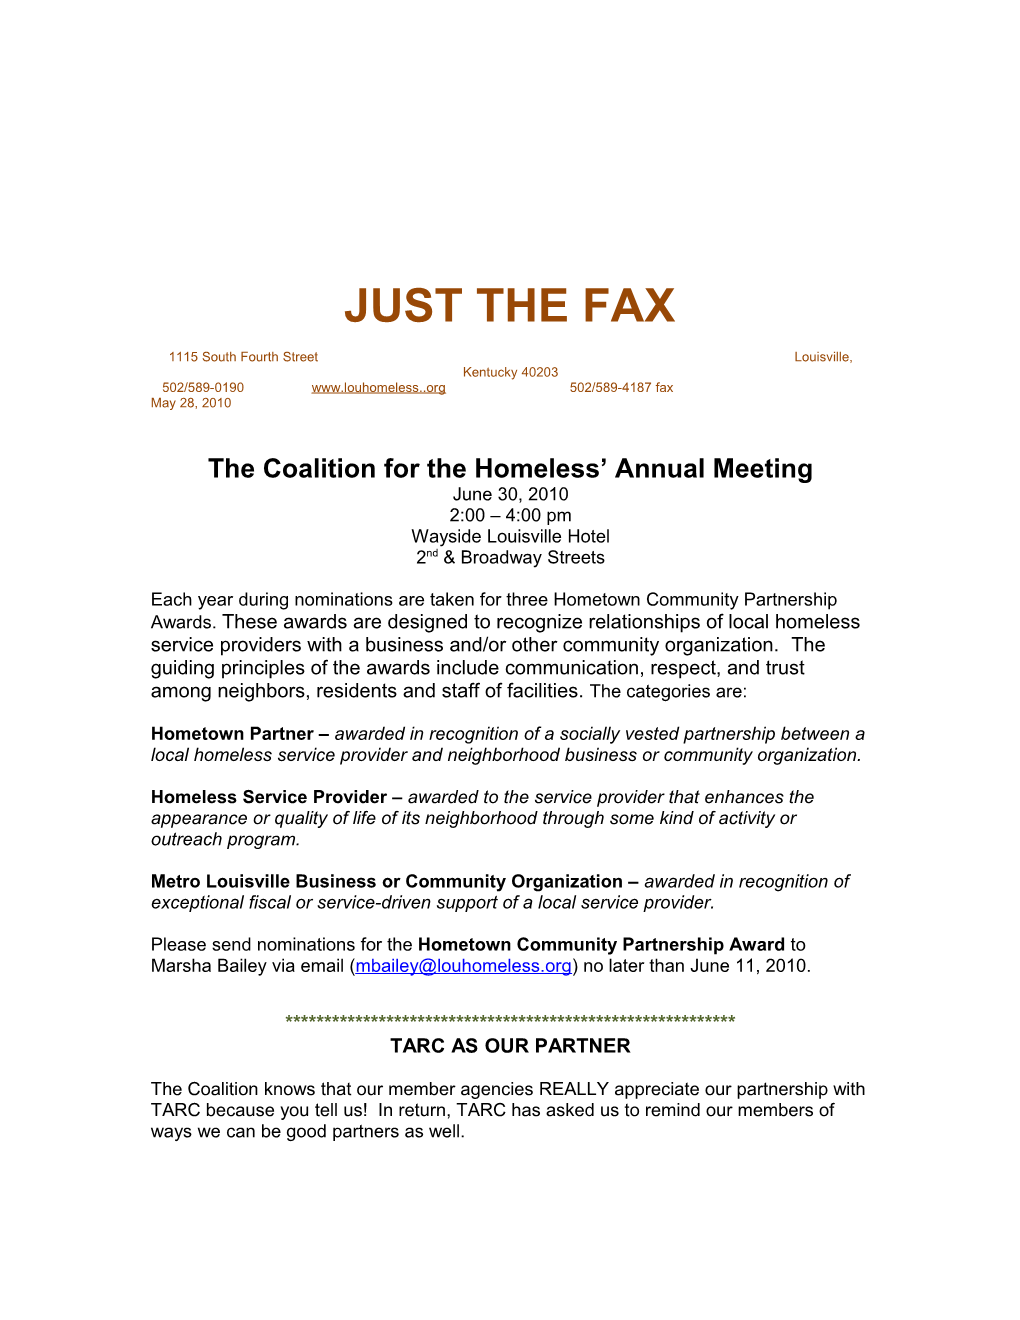 The Coalition for the Homeless Annual Meeting